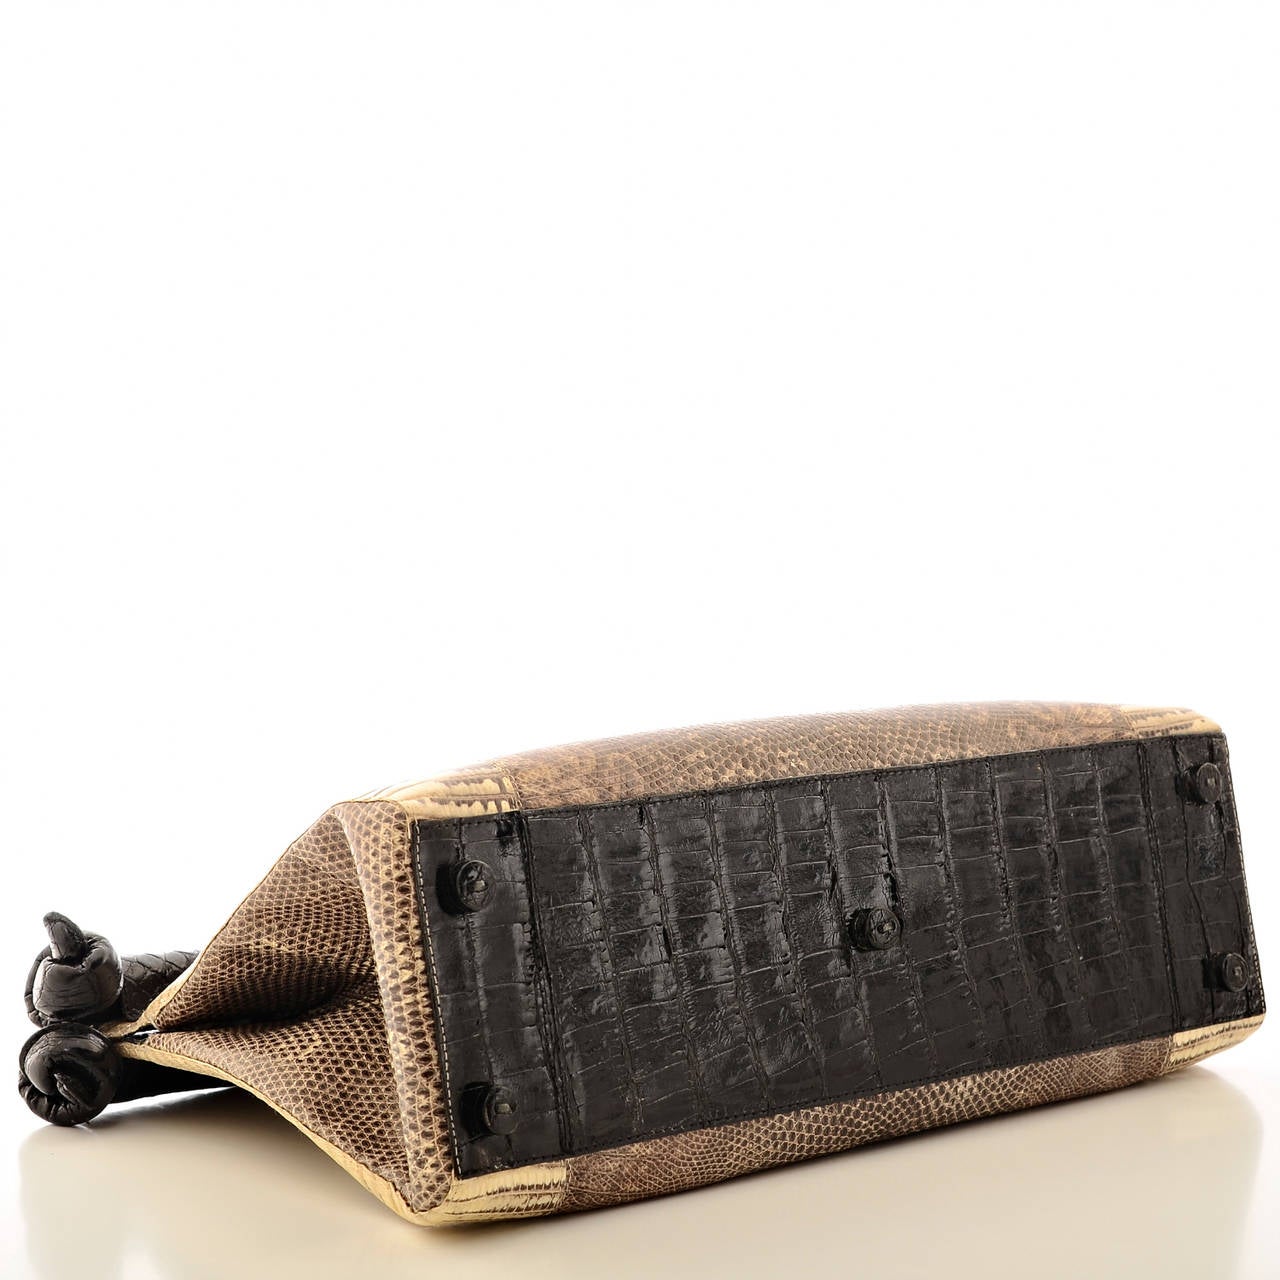 Nancy Gonzalez natural small-scaled python top handle clutch bag with black caiman crocodile handles and bottom, five feet, and  expandable sides.  Lime suede lining with center zipper compartment and zip pocket and cell phone pocket on one wall.
